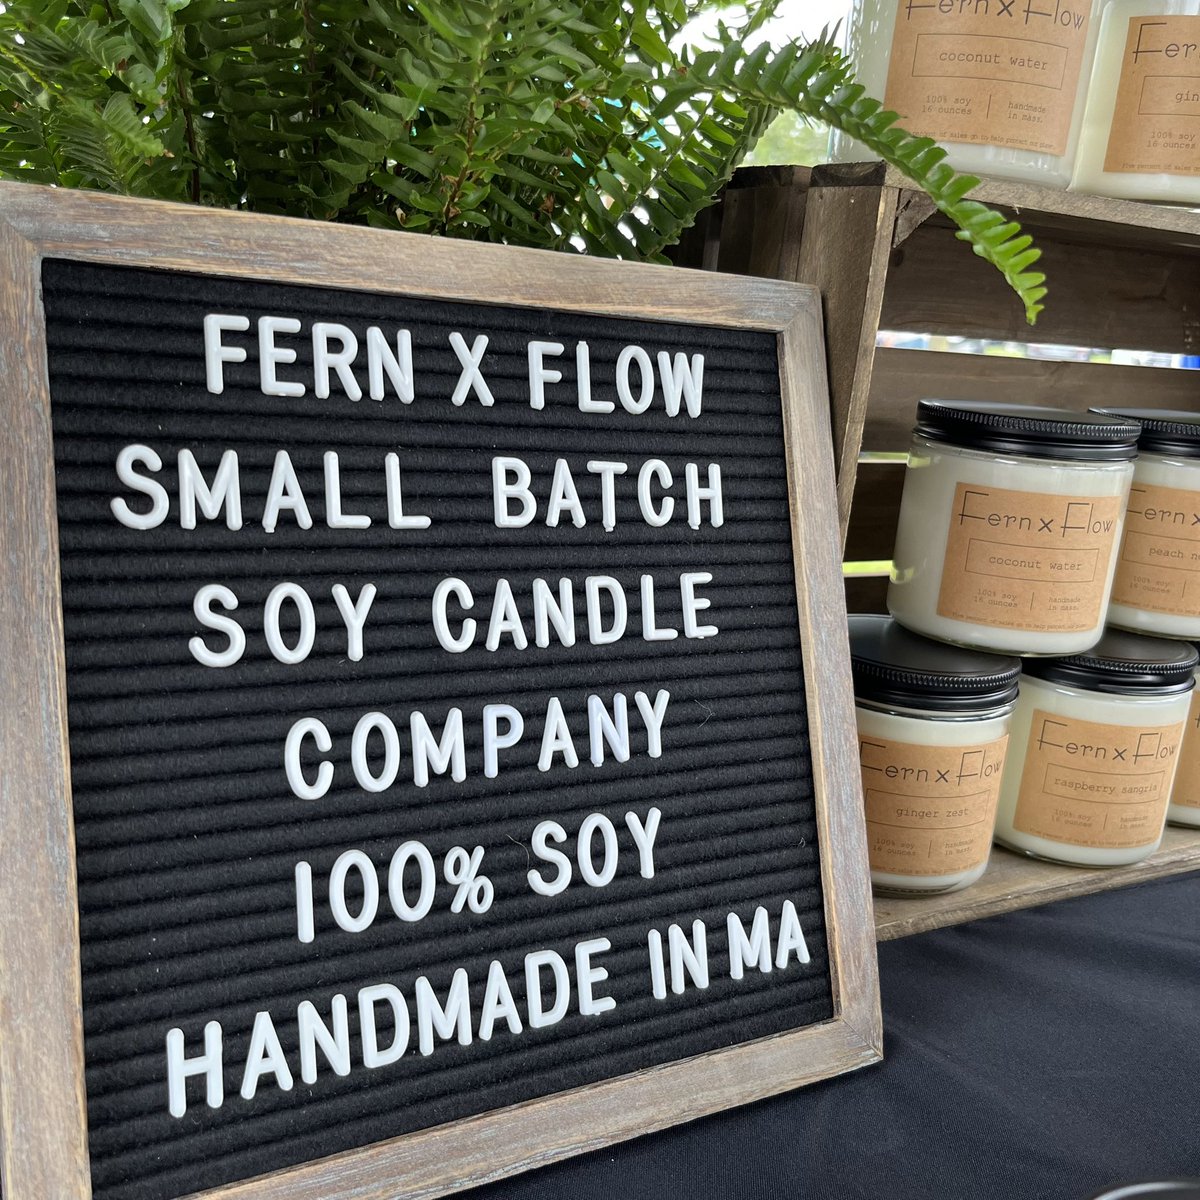 Take 20% OFF your first online order when you signup for our email newsletter.

🔥 fernxflow.com

#fernxflow #homedecor #soycandles #homefragrance #boston #newengland